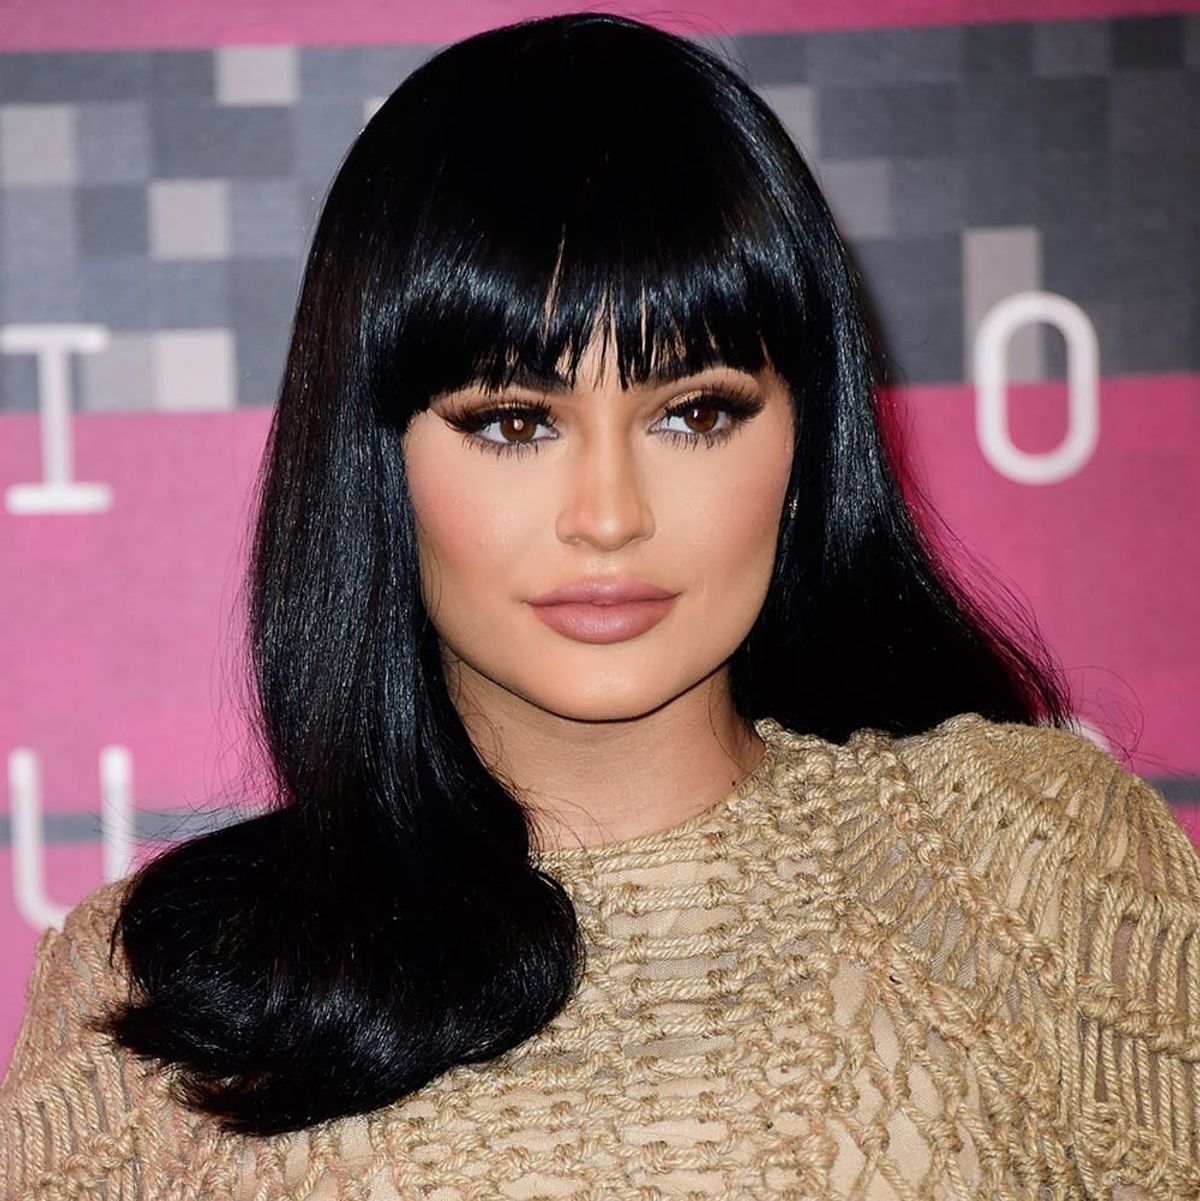 We Asked an Expert If You REALLY Need to Do What Kylie Jenner Did to Go Blonde